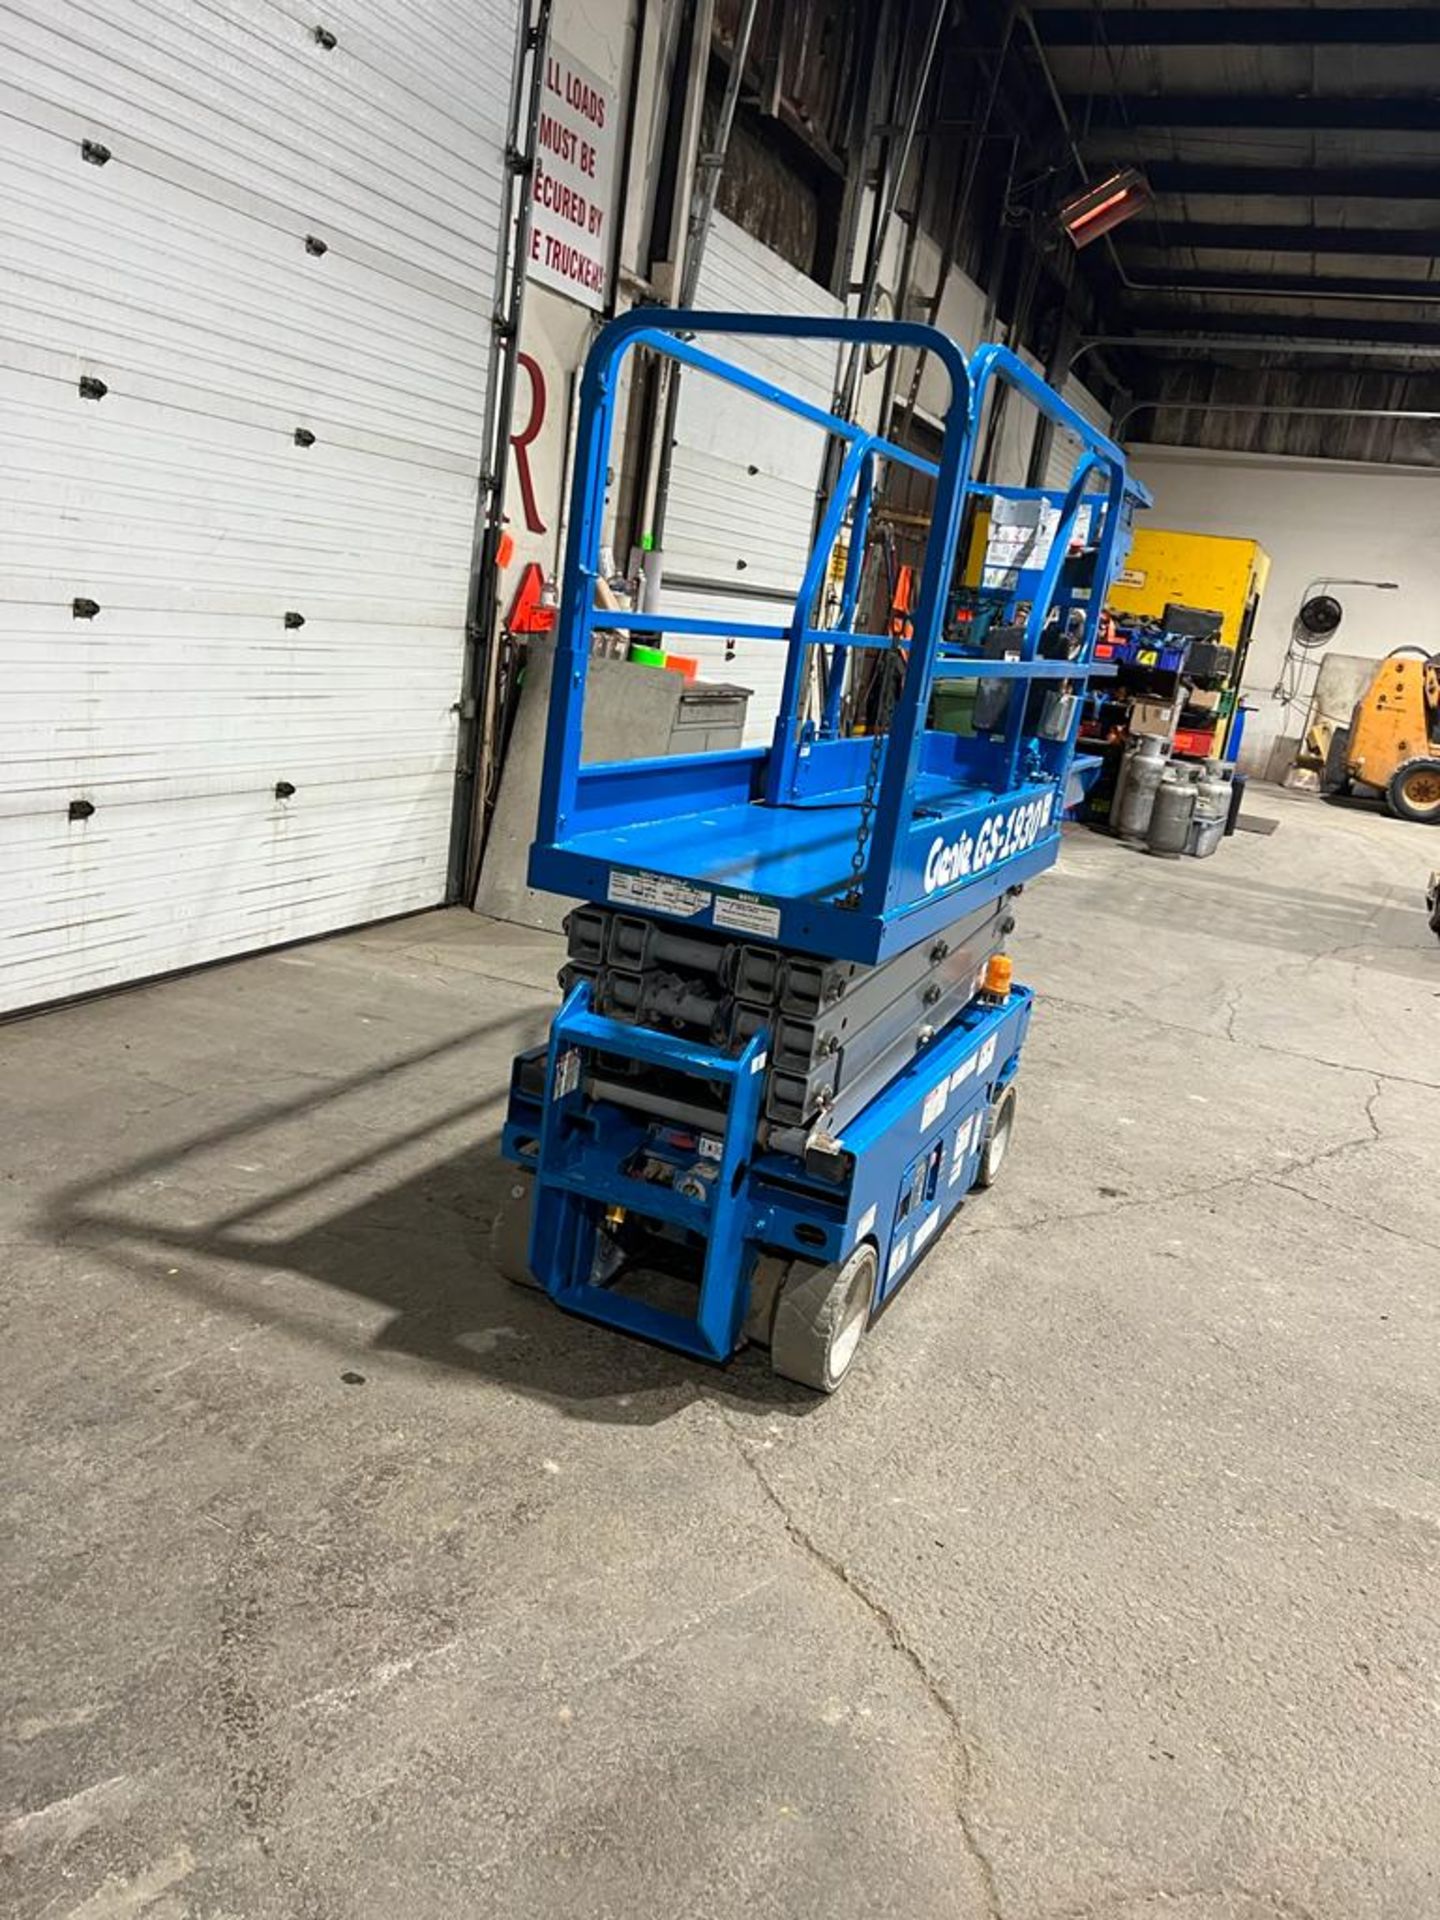 2012 Genie GS-1930 Electric Motorized Scissor Lift - with Extendable Platform Deck with pendant - Image 3 of 3